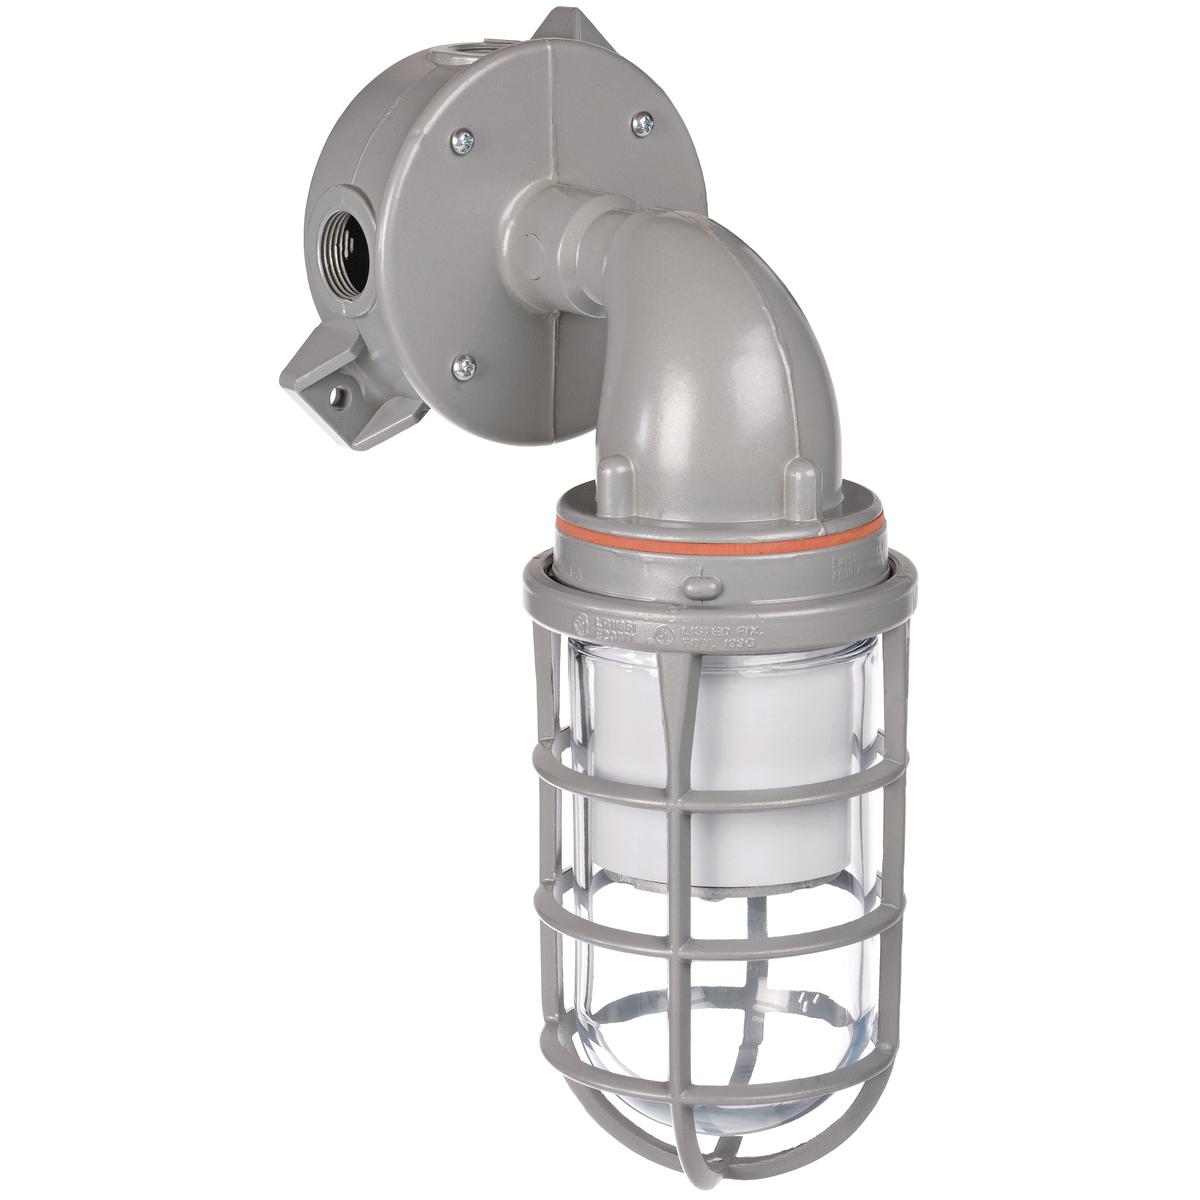 Hubbell VSL1330W2SG The VSL Series is a Vapor Tight/ Utility fixture using energy efficient LED's. This fixture is made with a cast copper-free aluminum housing and mount that is  suitable for harsh and hazardous environments. With the design of this fixtures internal heat s